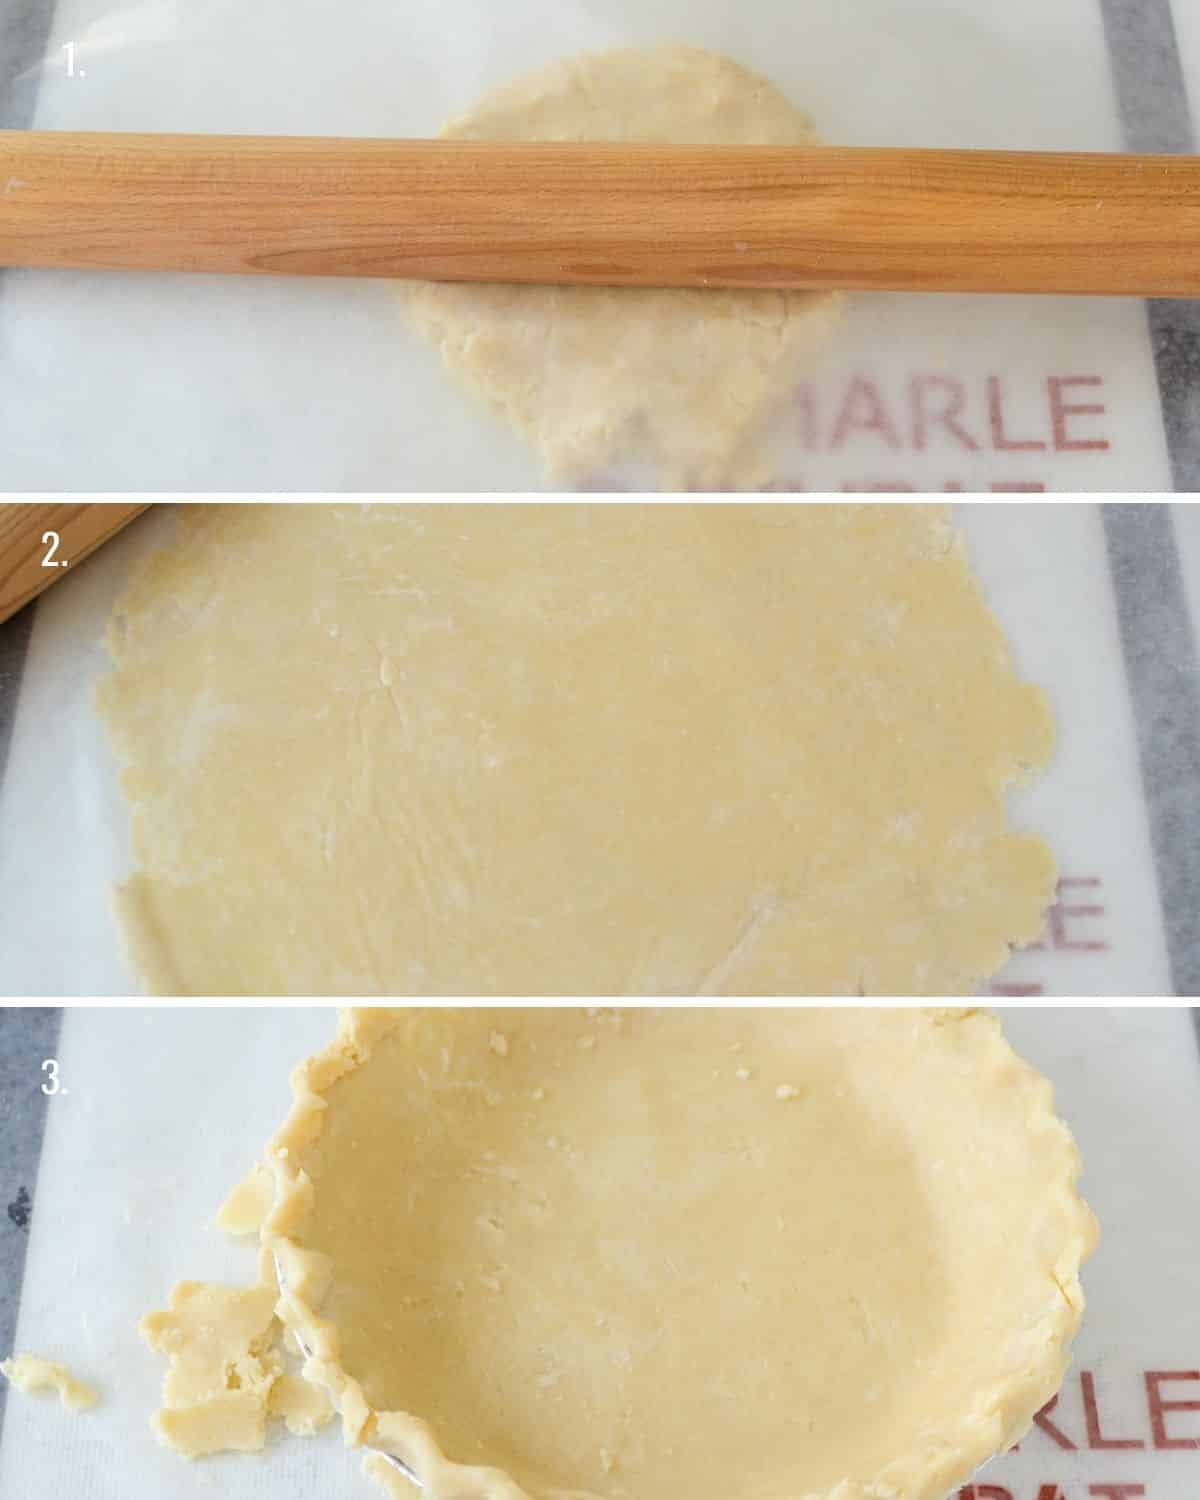 3 photos showing dough between wax paper, rolled out dough and pie crust in pie plate